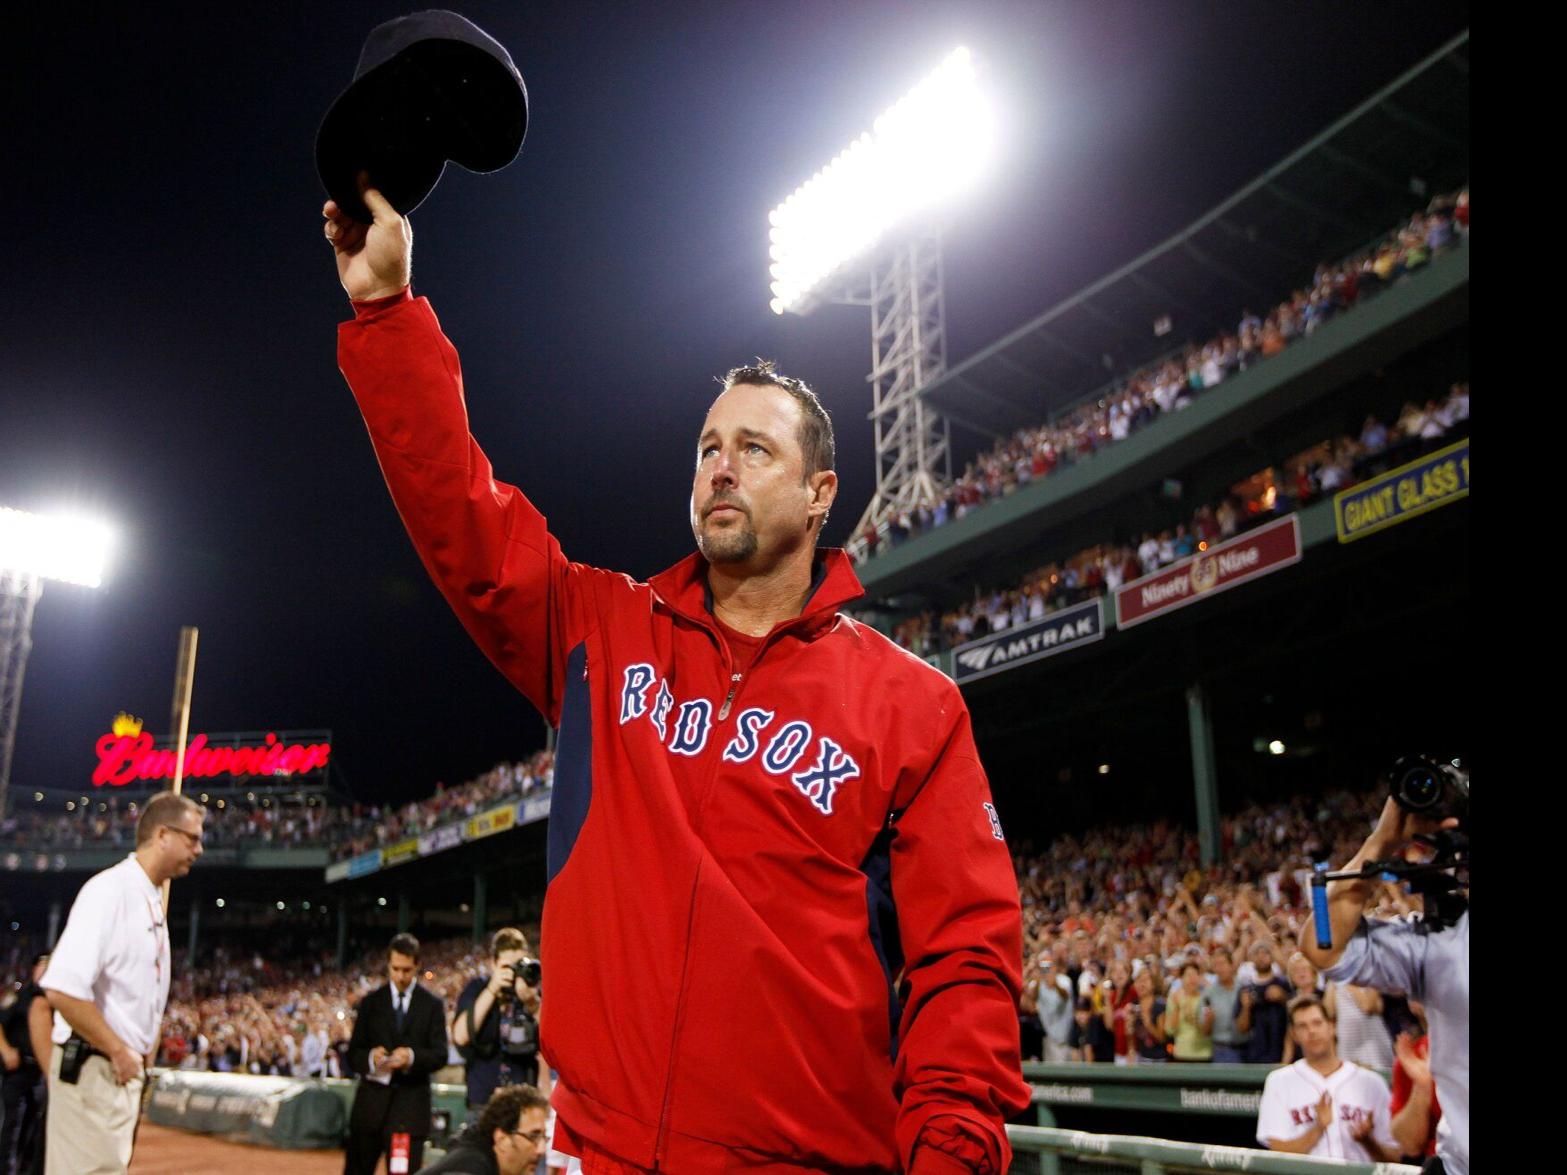 Former Boston Red Sox pitcher Tim Wakefield dies at age 57, Sports